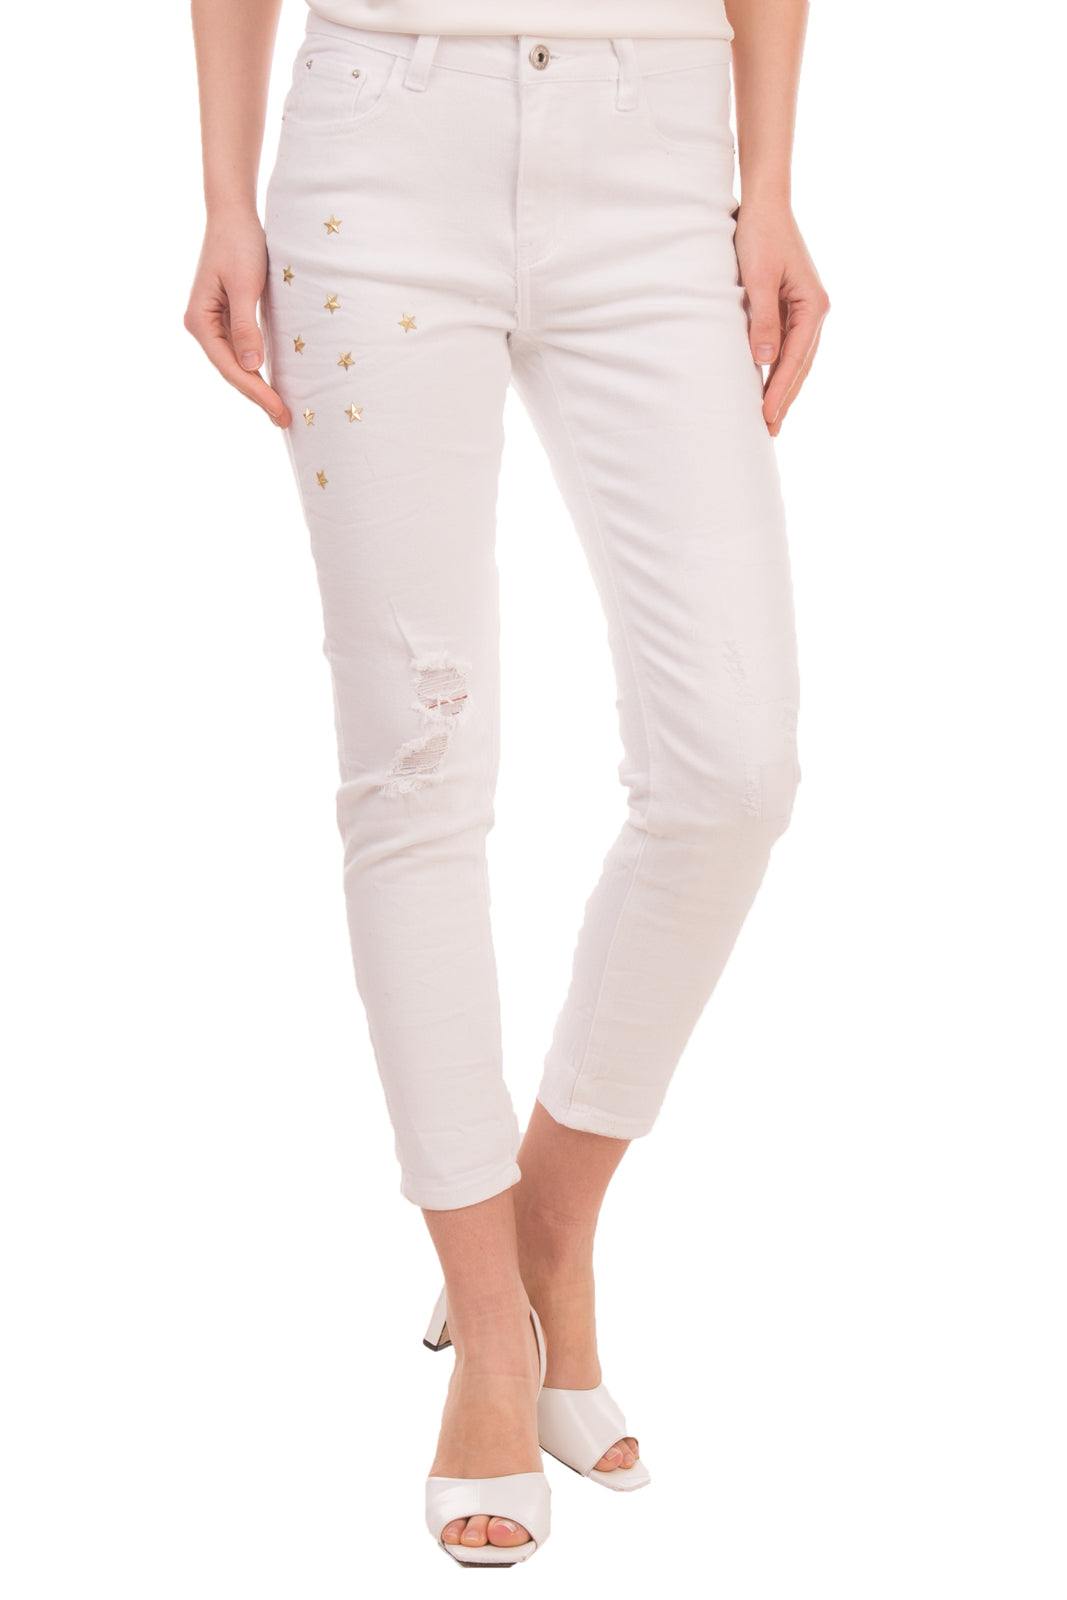 ODI ET AMO Jeans Size 30 Stretch White Distressed Style Star Studs Cropped gallery main photo